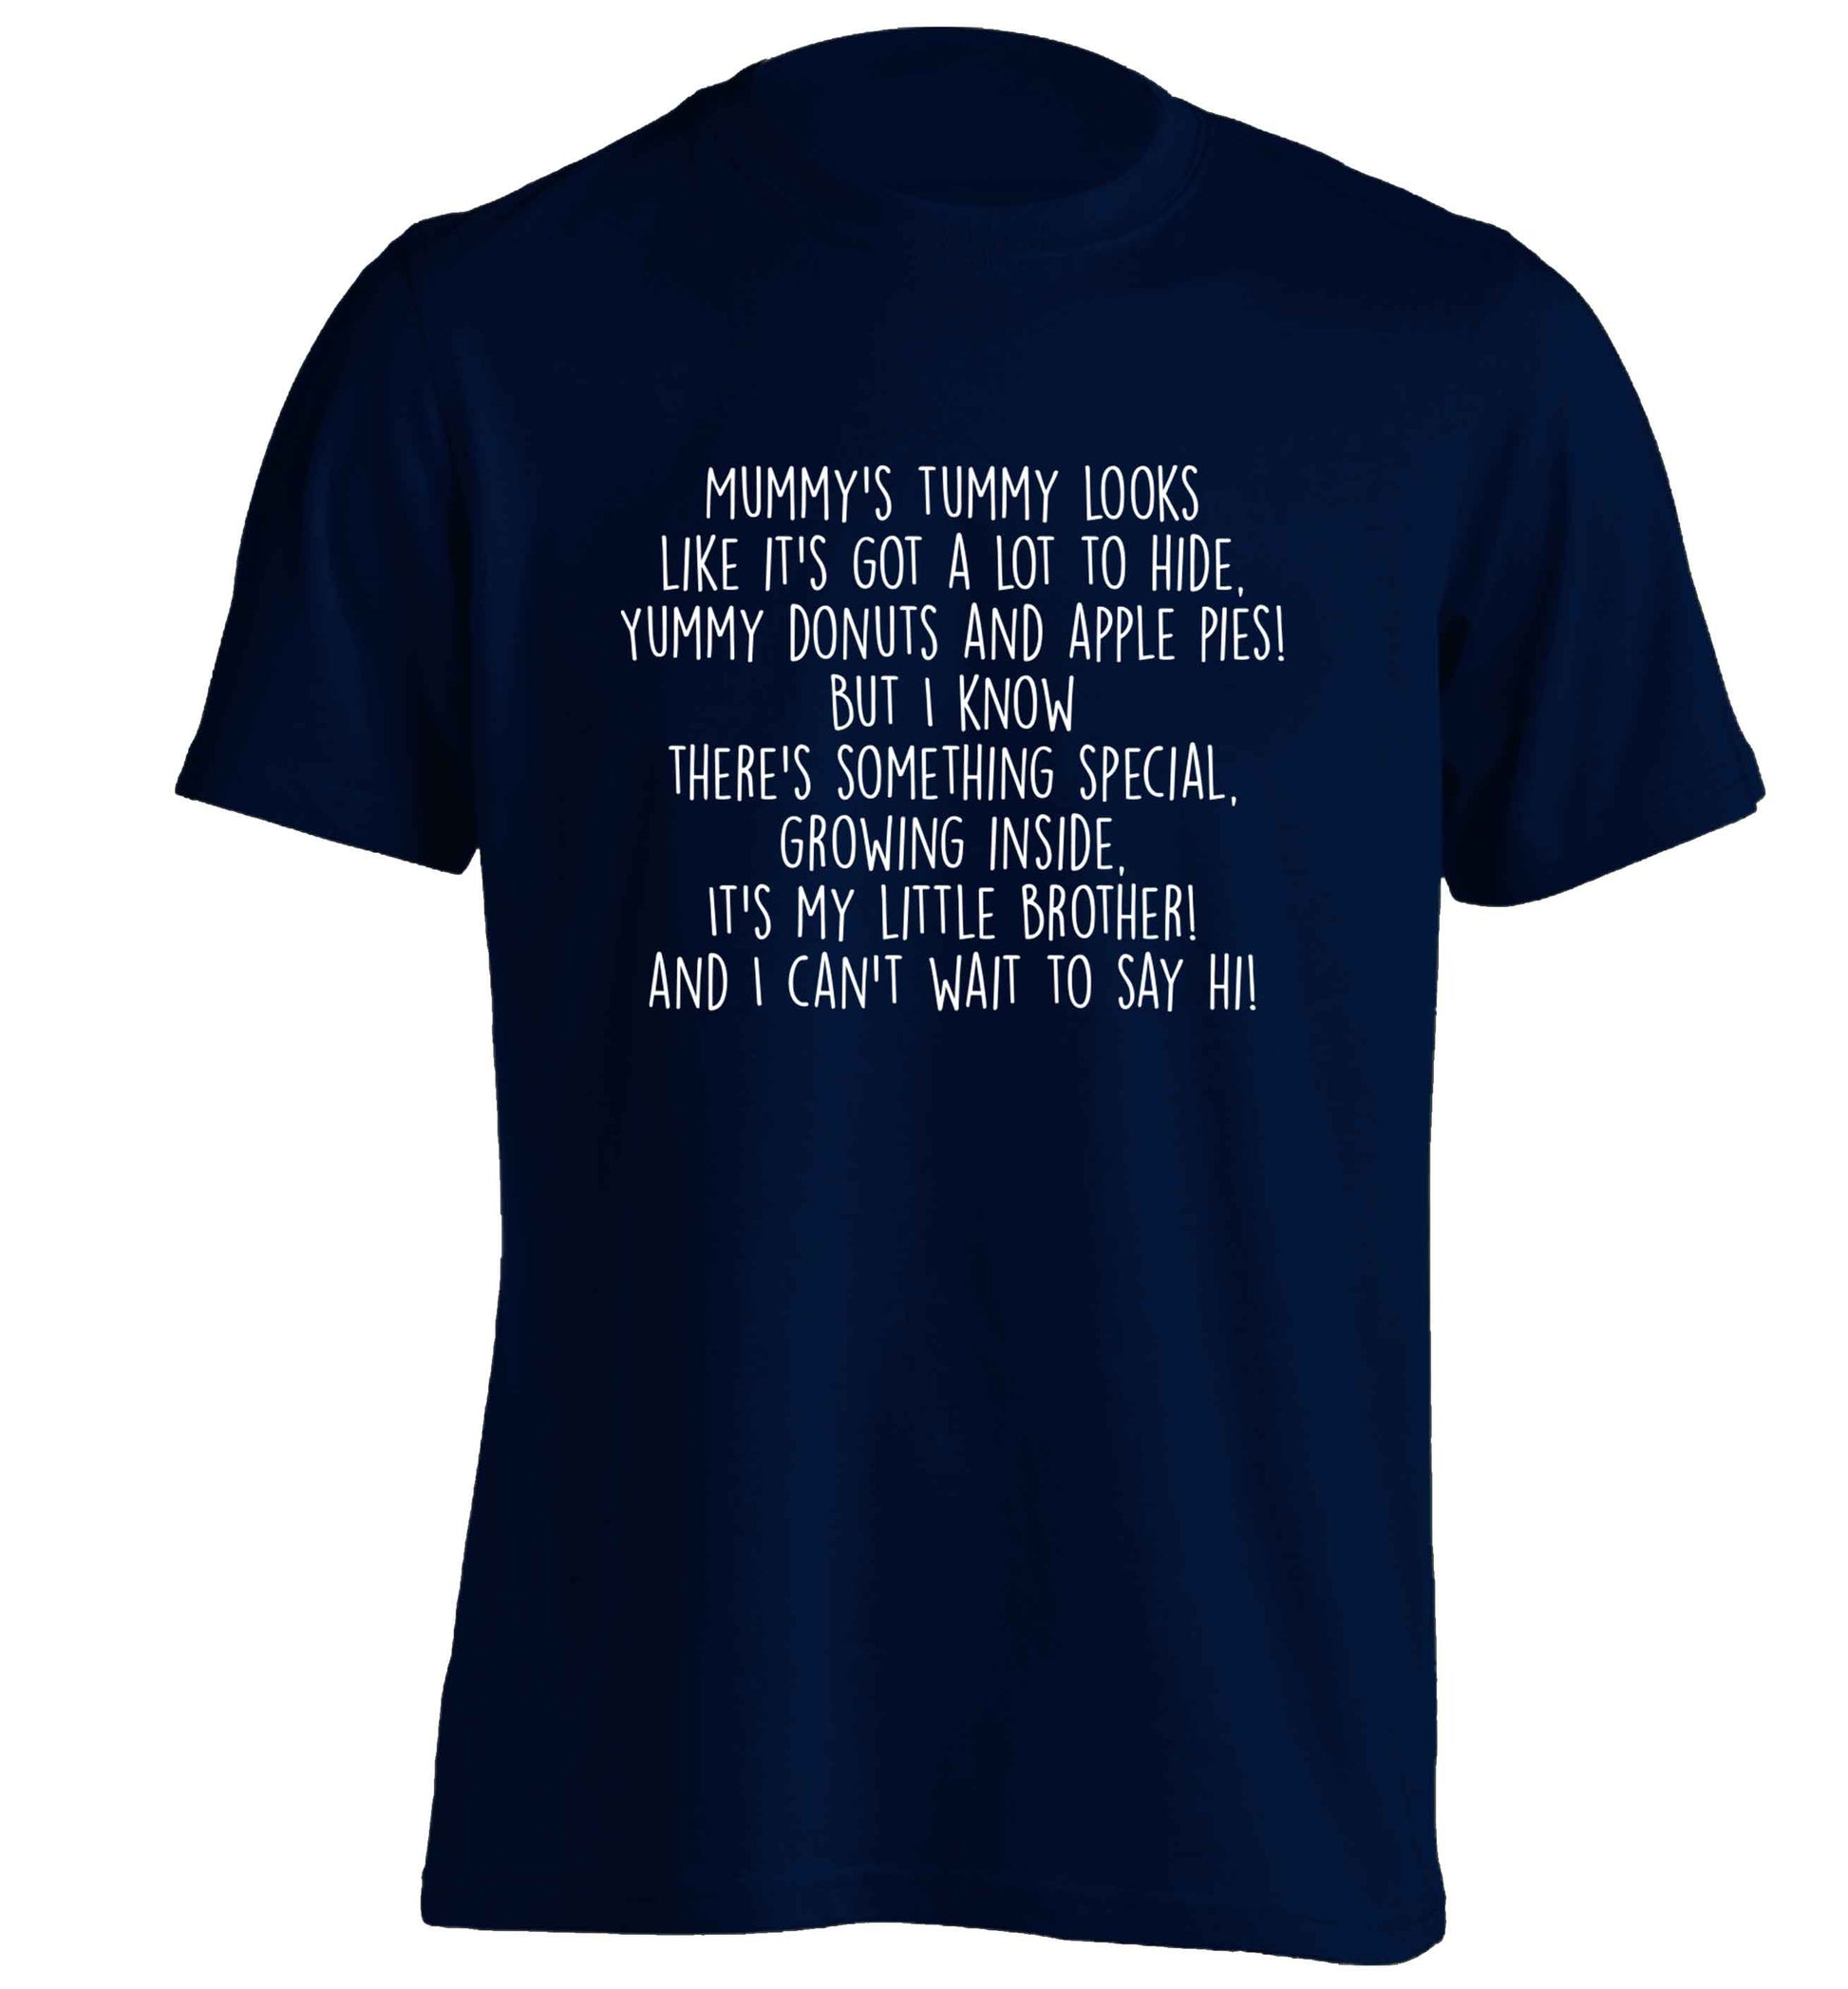 Something special growing inside it's my little brother I can't wait to say hi! adults unisex navy Tshirt 2XL